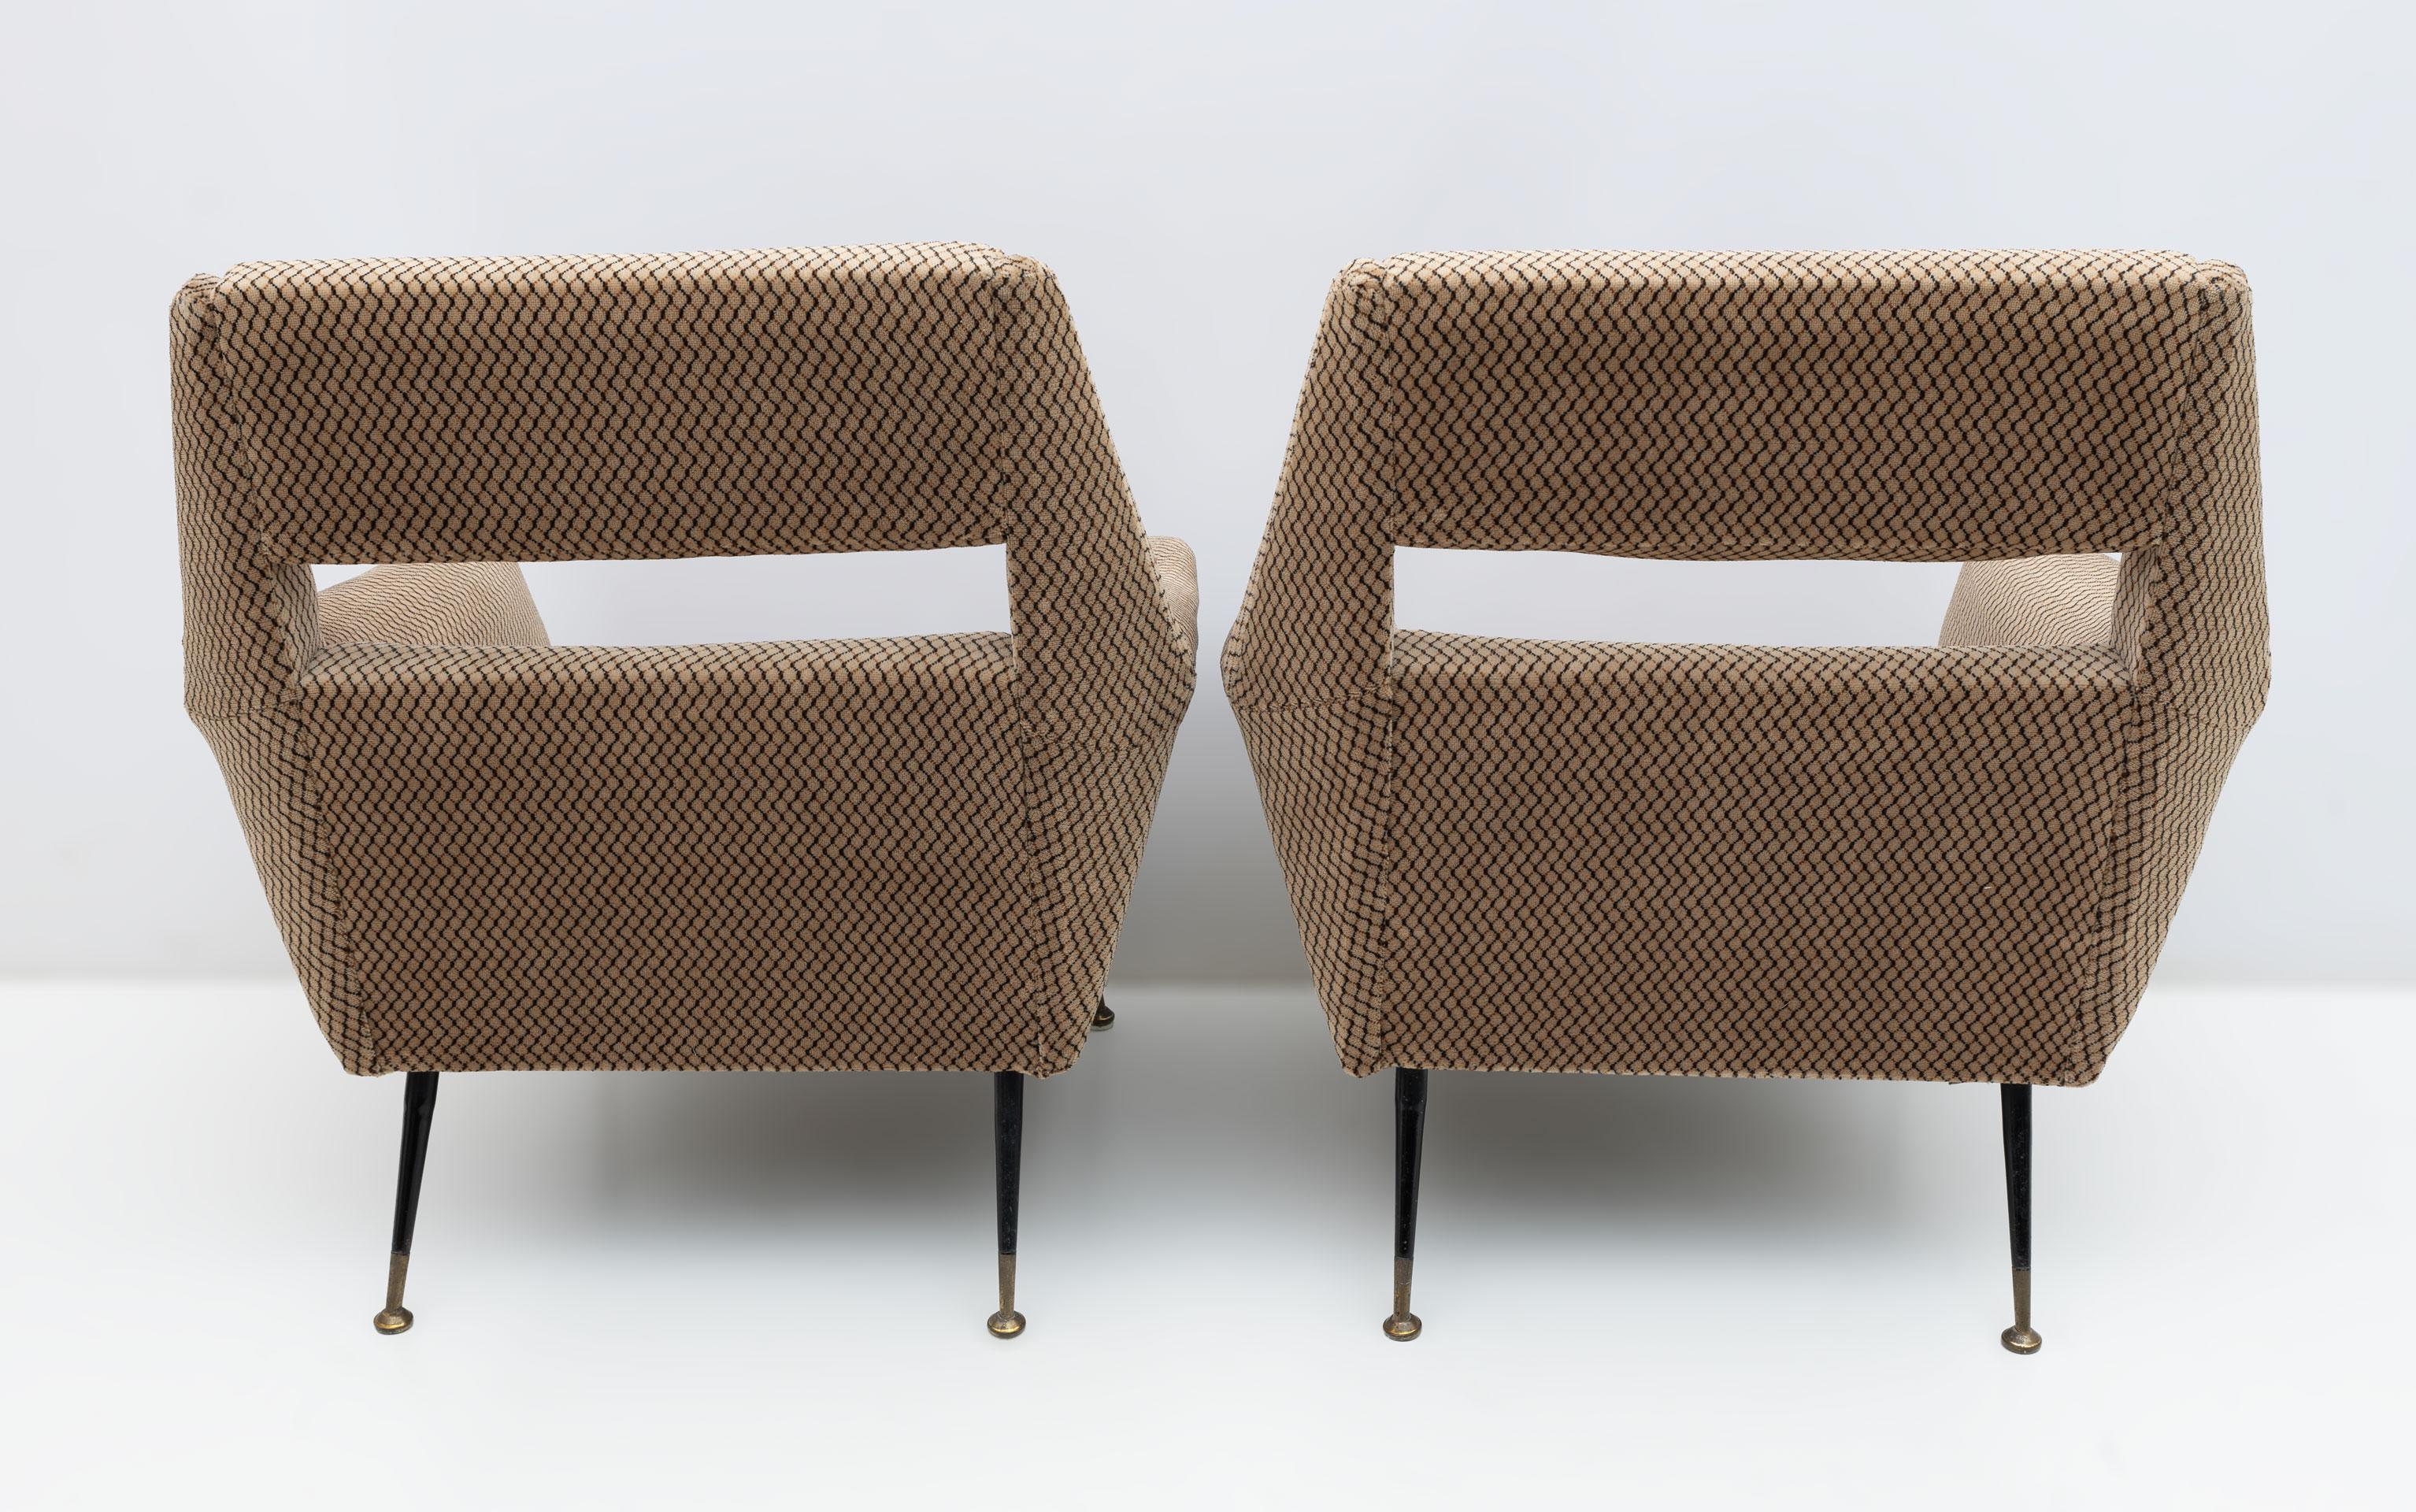 Pair of armchairs with wooden structure, fabric covering, brass and lacquered metal supports.
Designed by Gigi Radice and produced by Minotti, Italy, approx. 1950.
Original velvet upholstery but worn, new upholstery recommended.